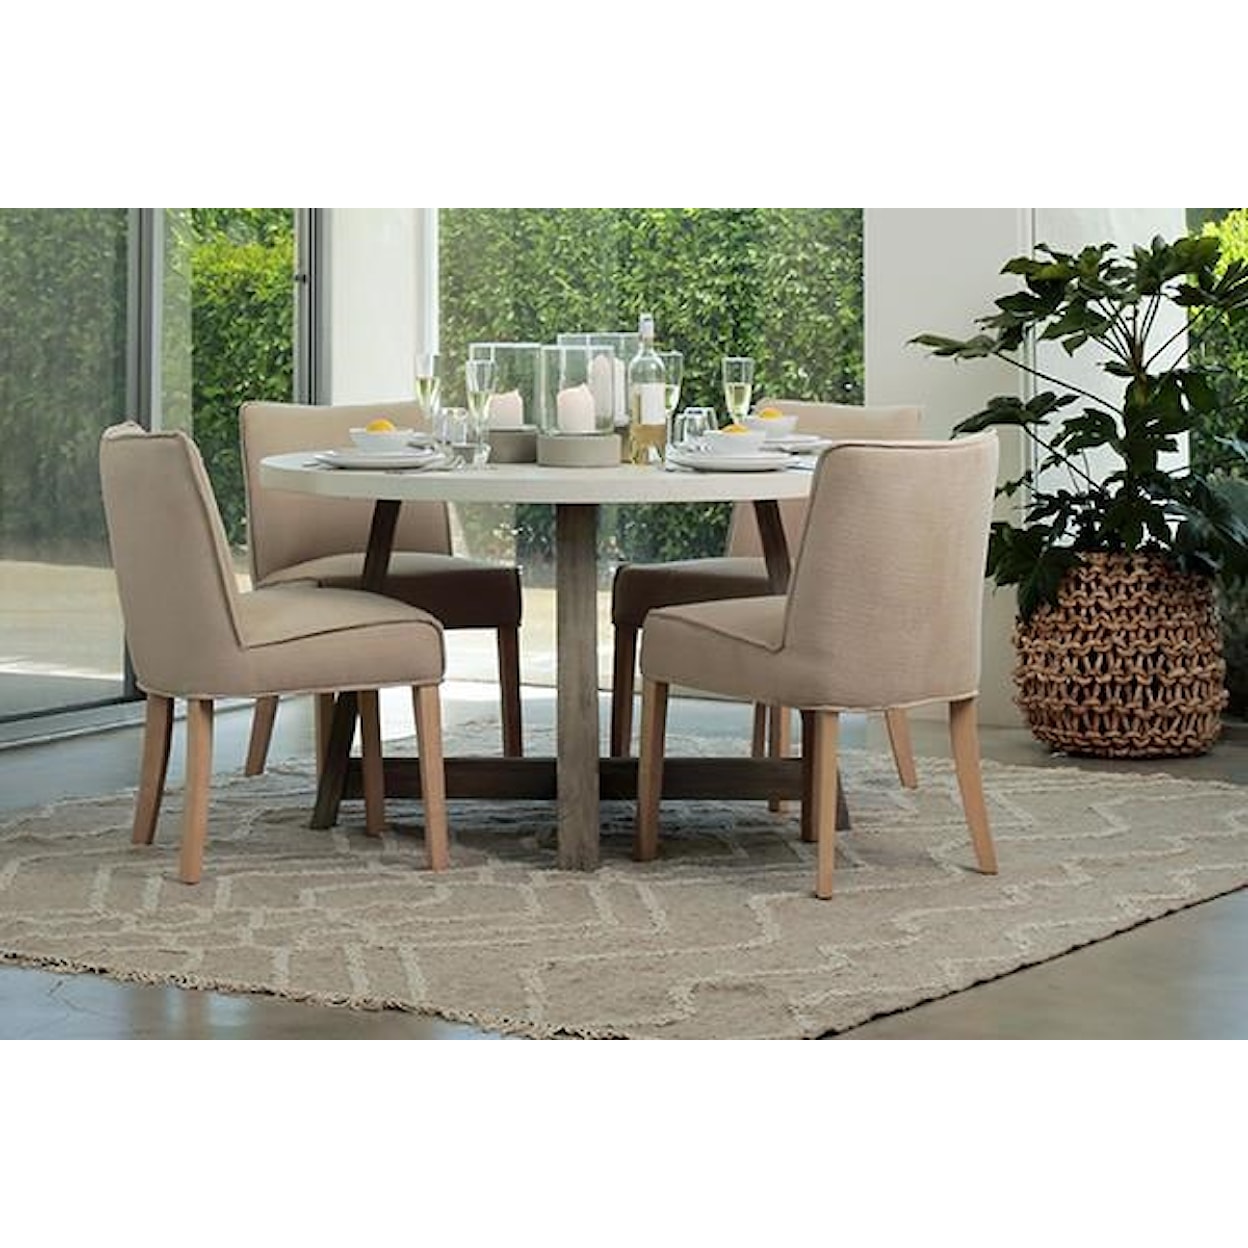 Dovetail Furniture Dining Tables Seaton Dining Table